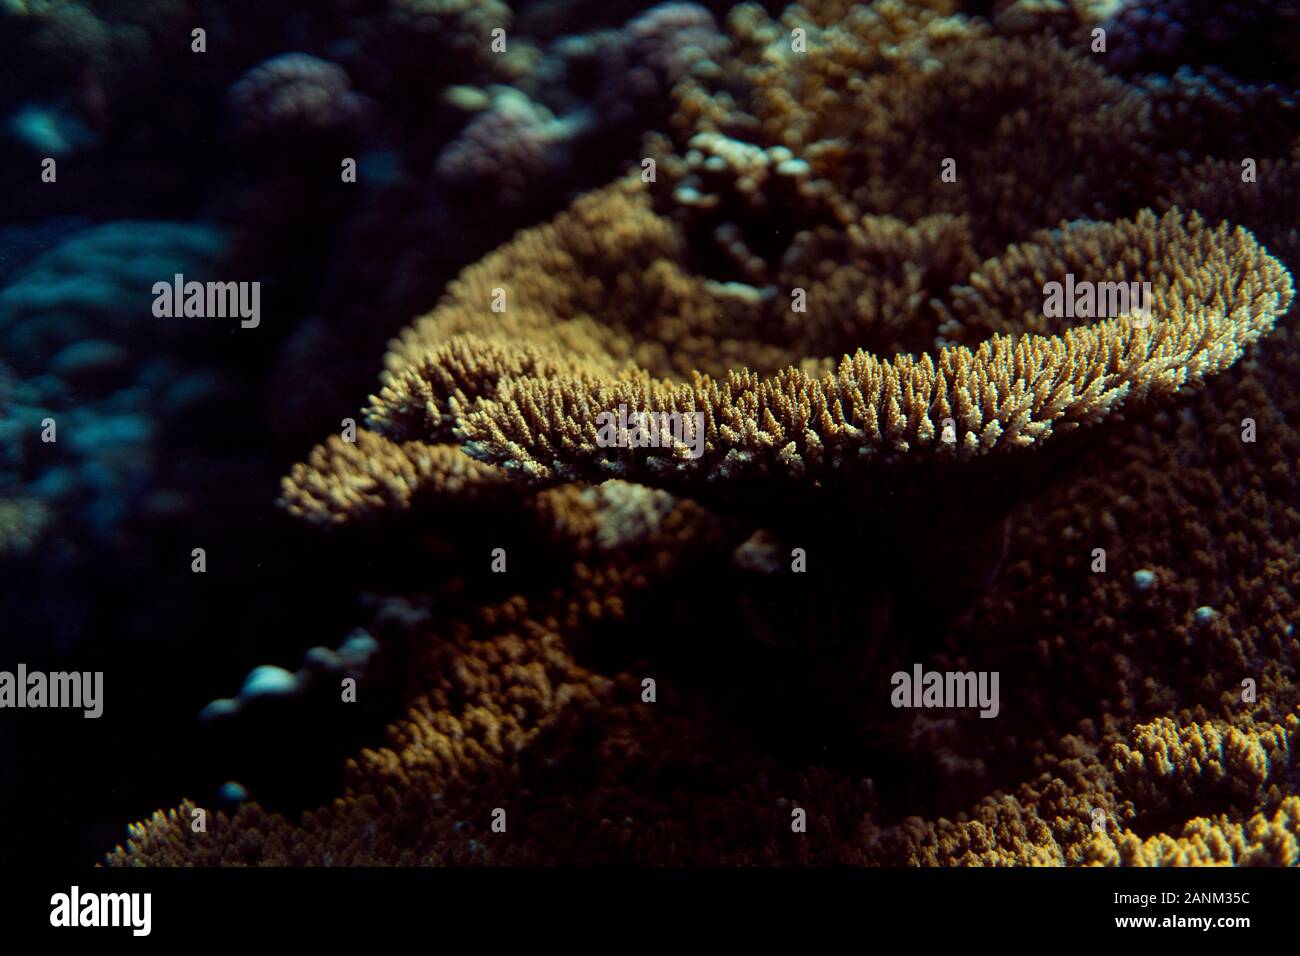 Coral reef close up, coral reef macro photography, underwater coral reef texture, ocean nature close up Stock Photo